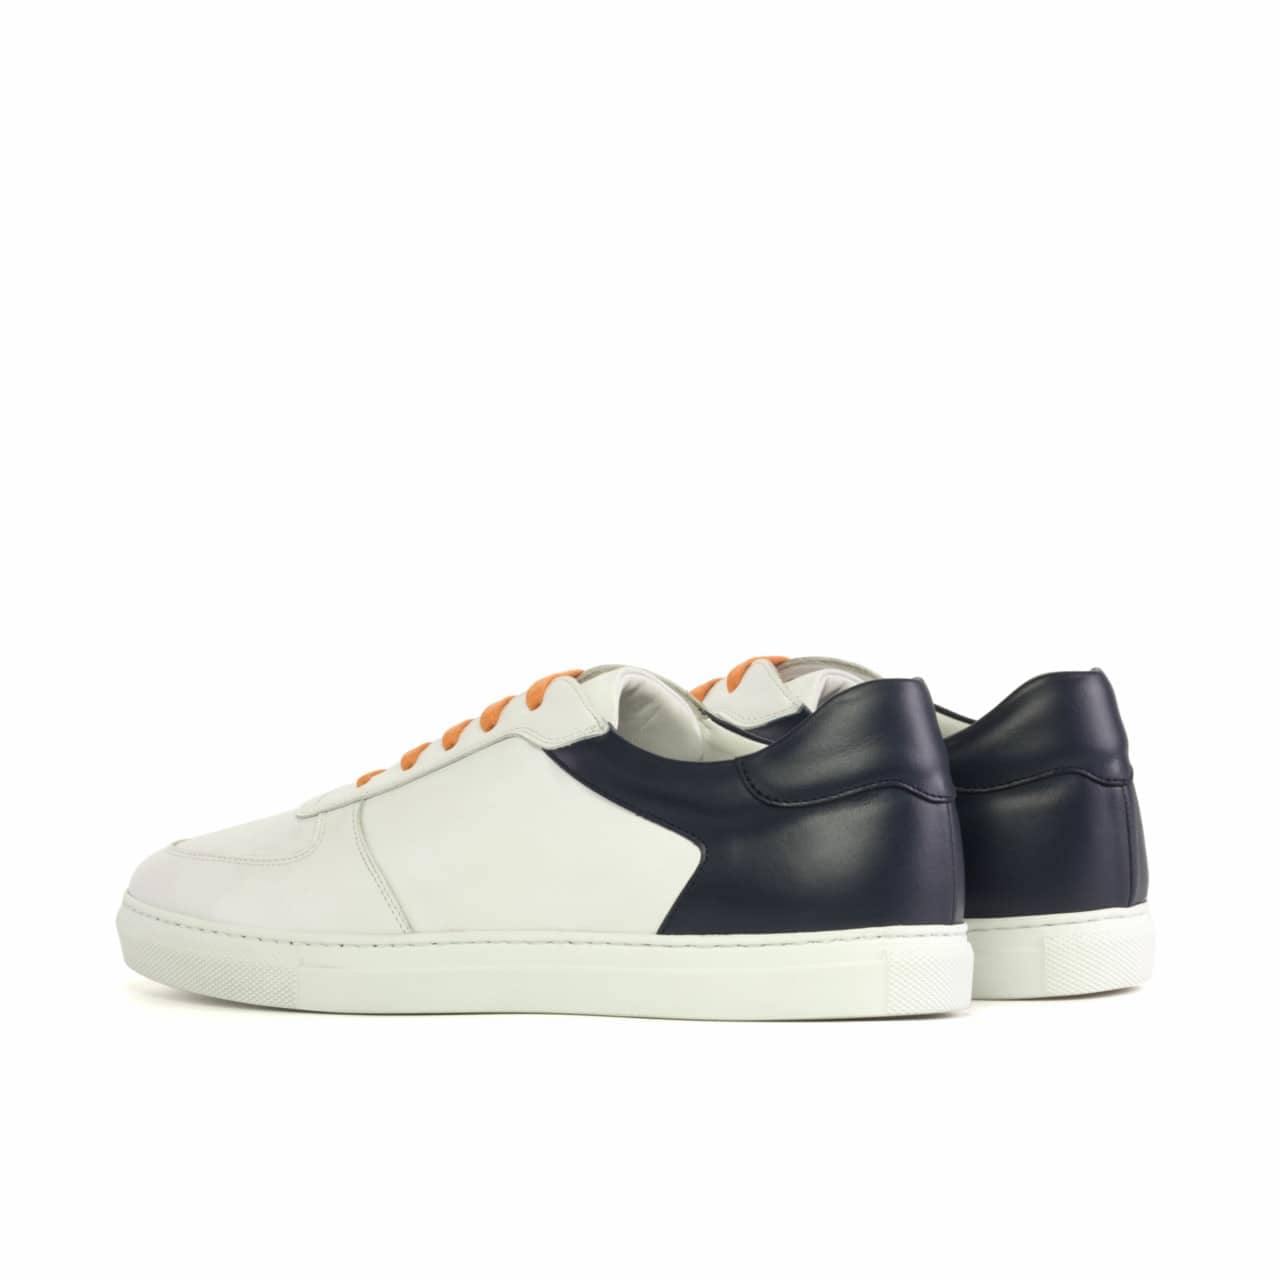 The Ashland Ave. Low Top Sneaker No. 5468 | Robert August